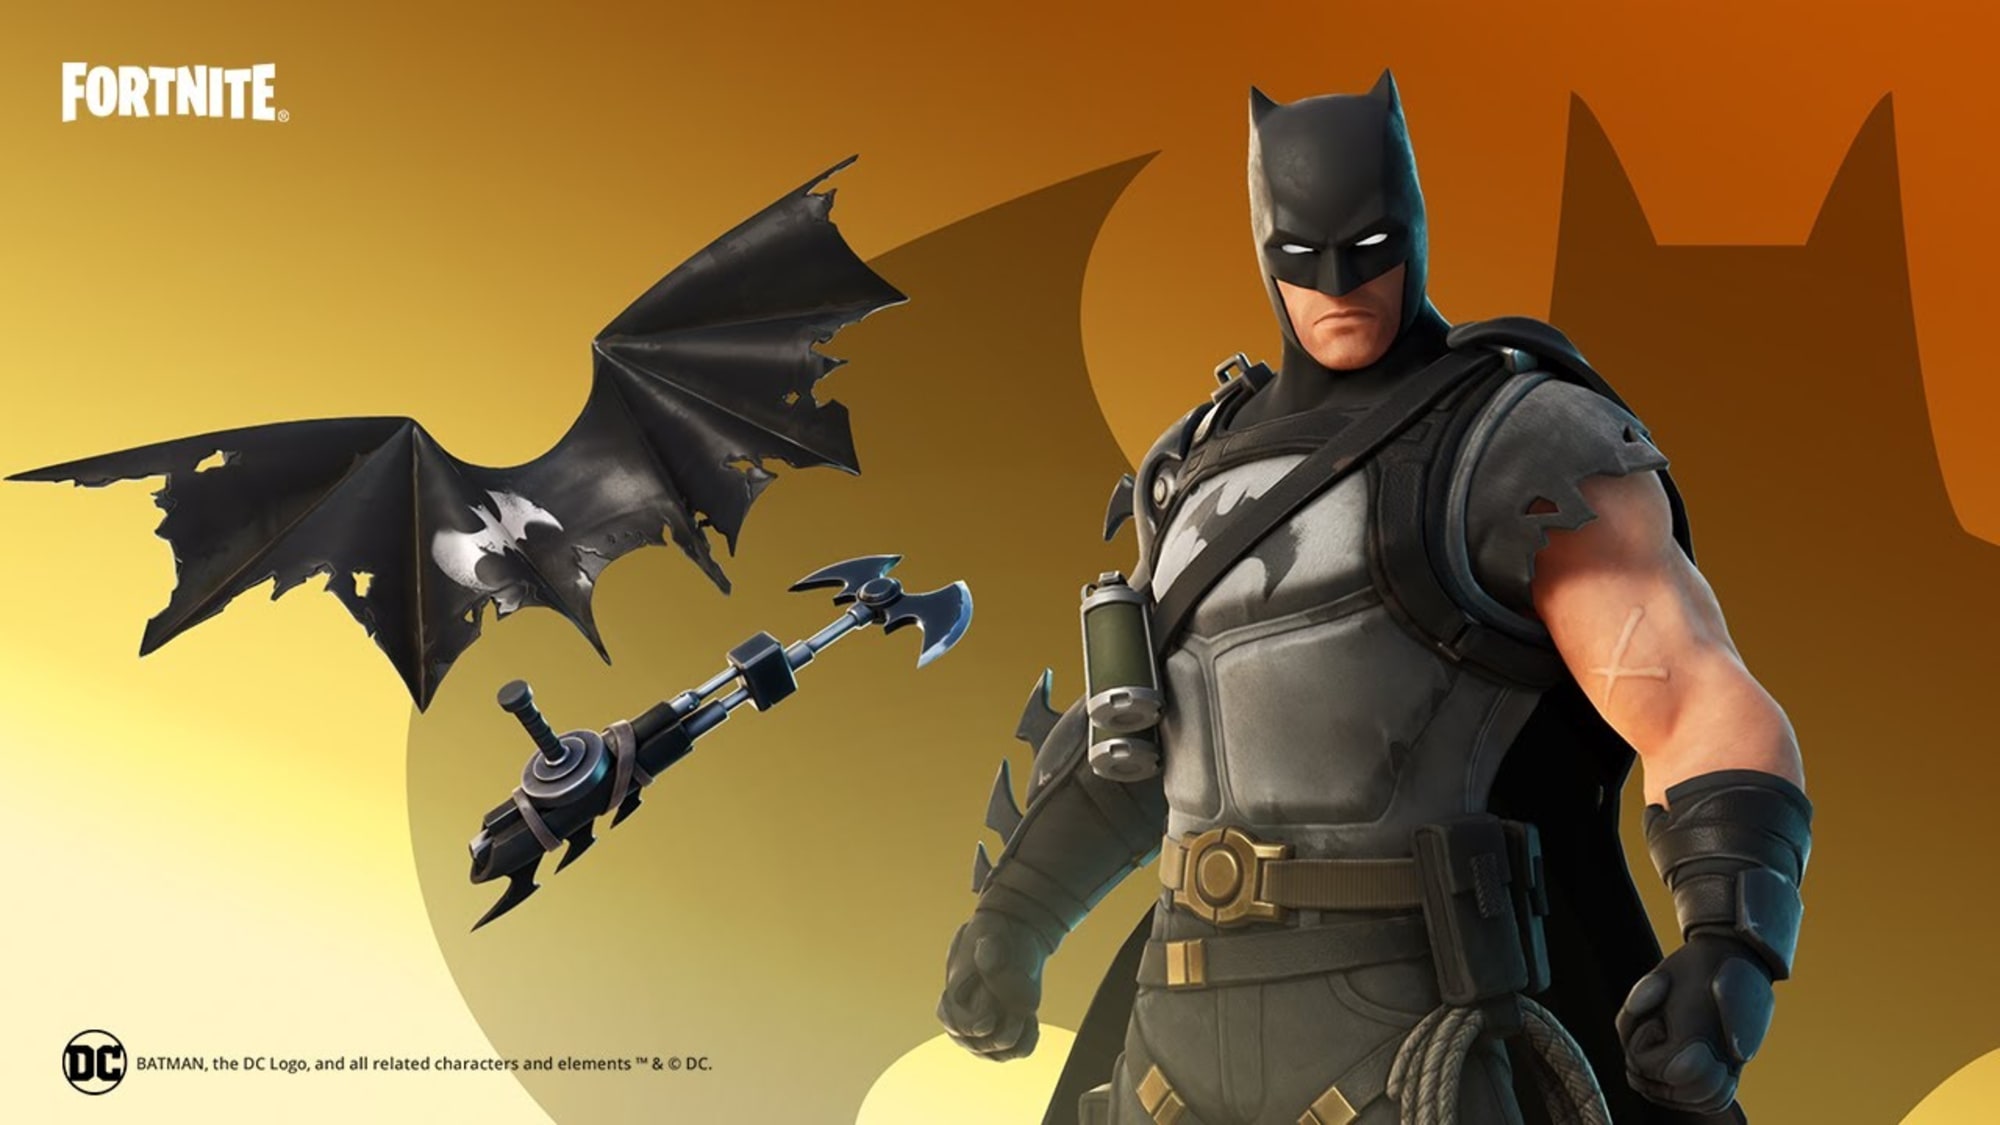 Why is the Fortnite Batman Zero crossover so confusing?